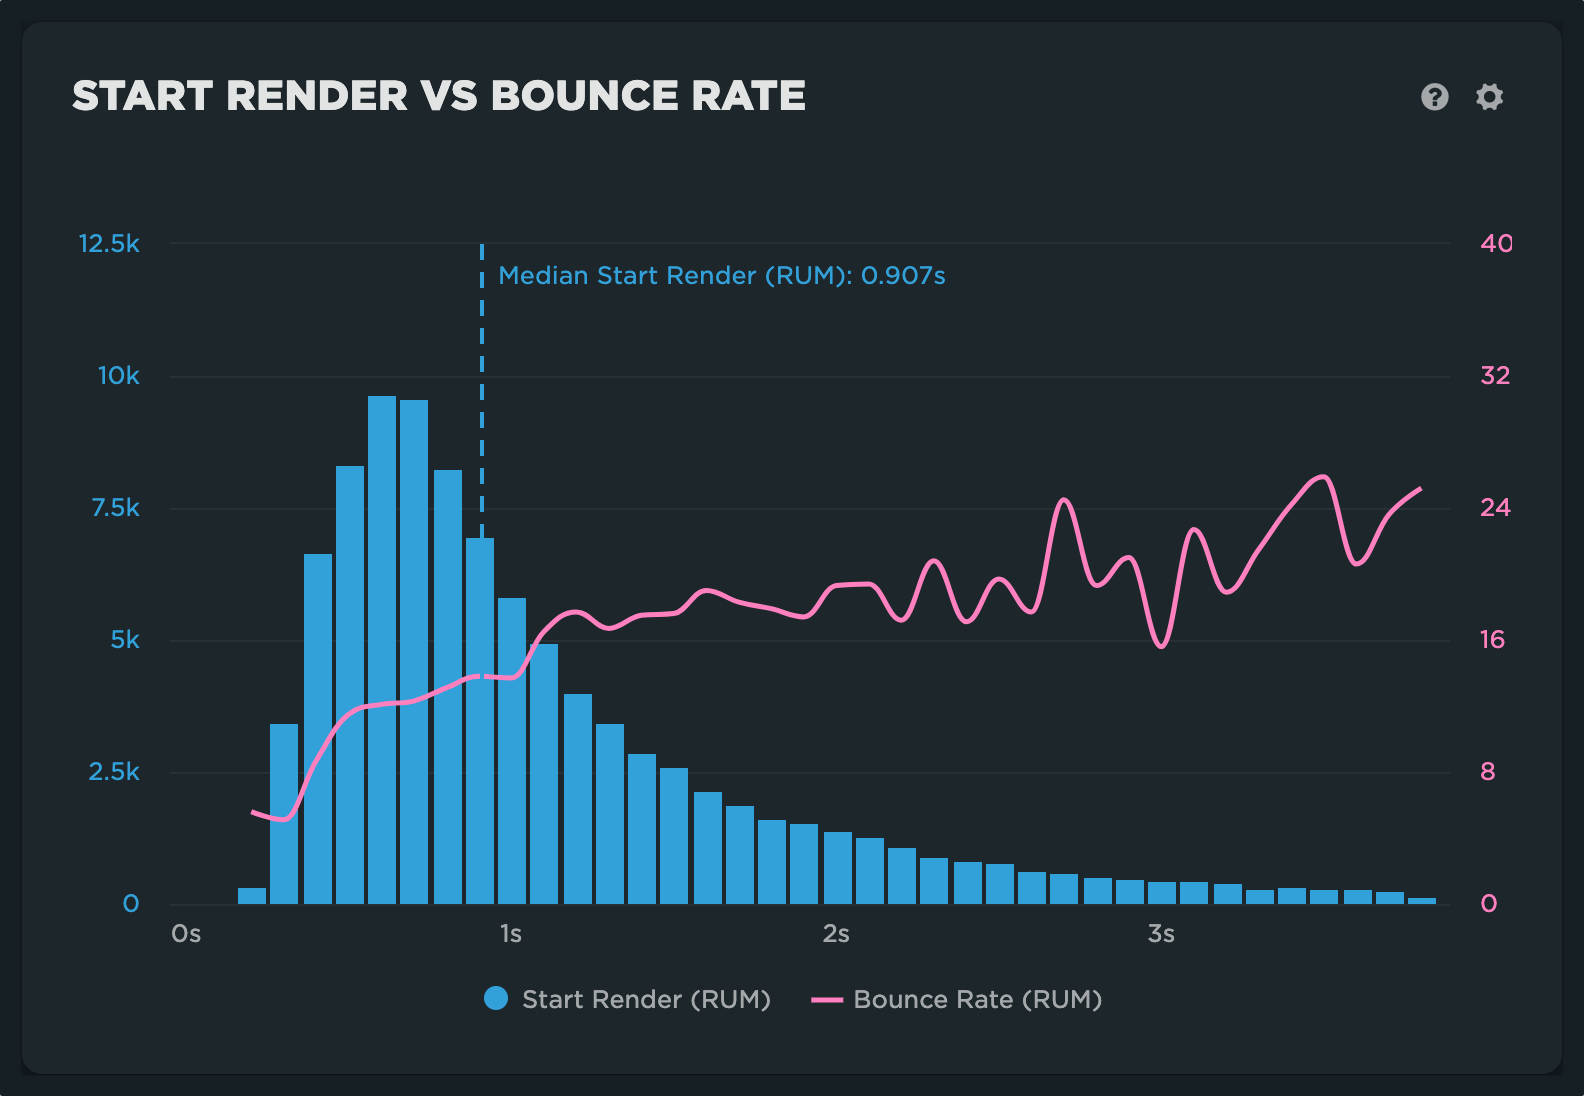 In the 'Users' dashboard, you can see the impact of metrics like start render on the bounce rate or conversion rate (if defined).